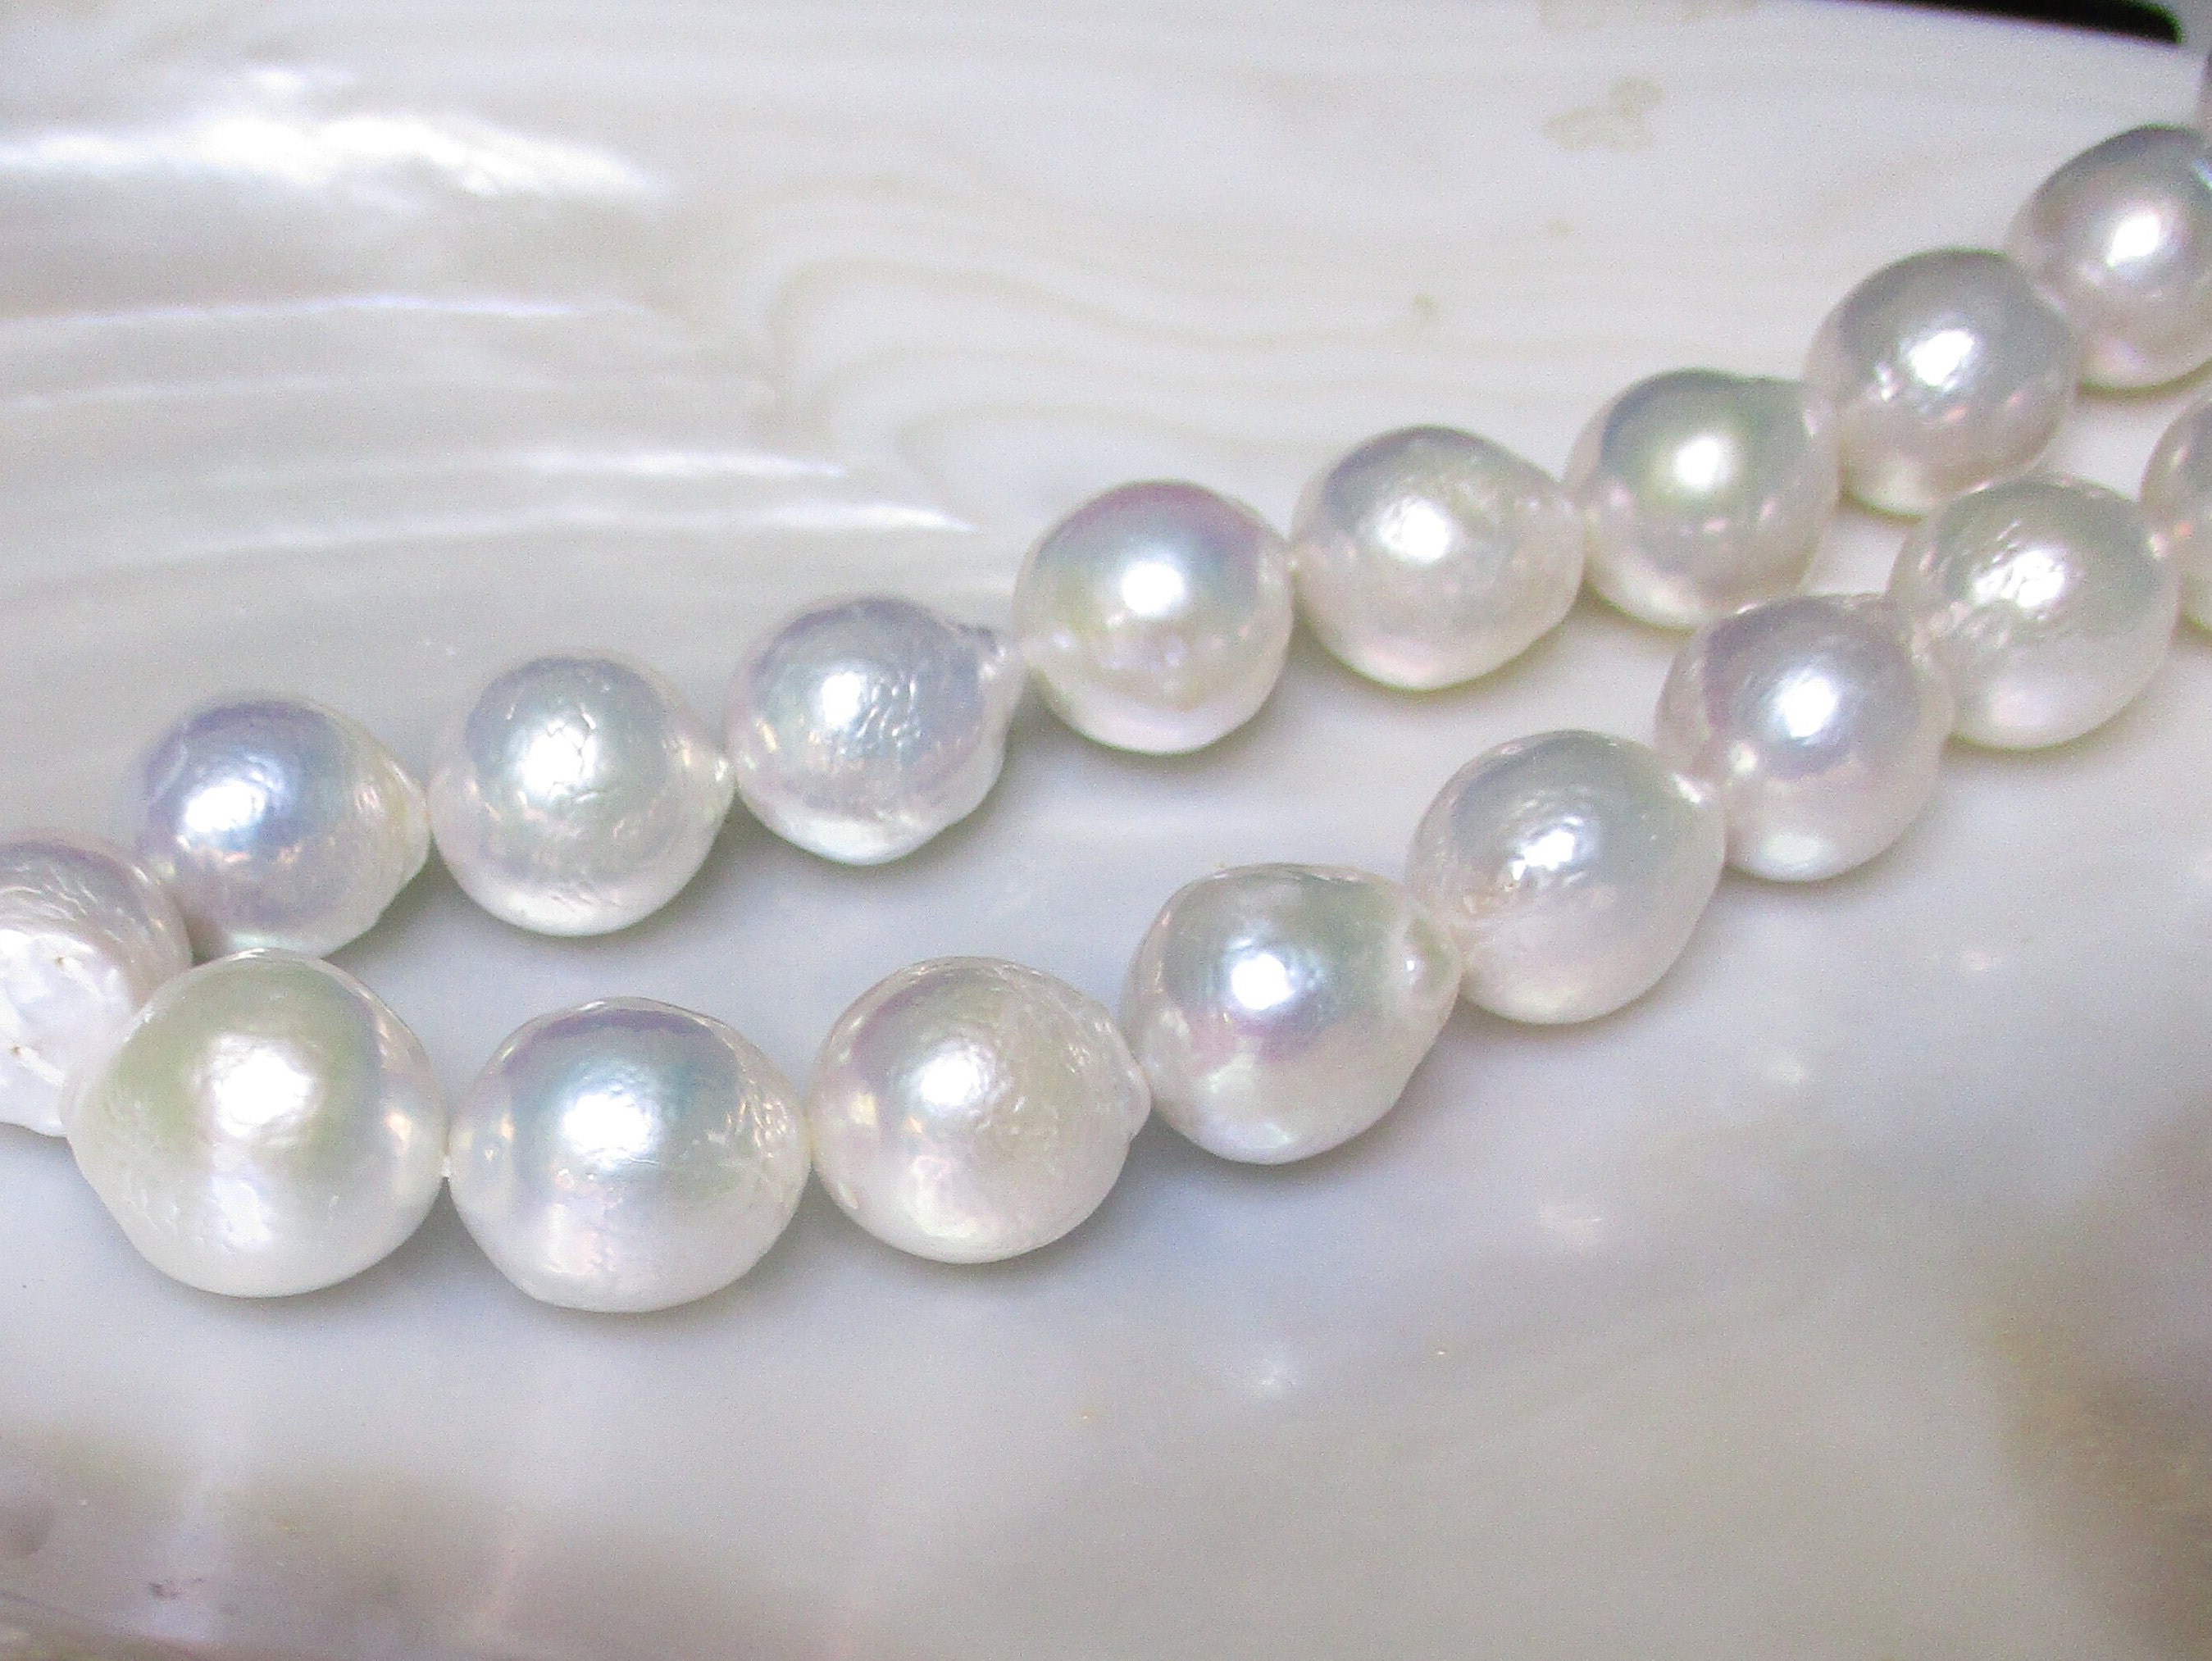 At Auction: Silver tone white faux pearl, clear and iridescent